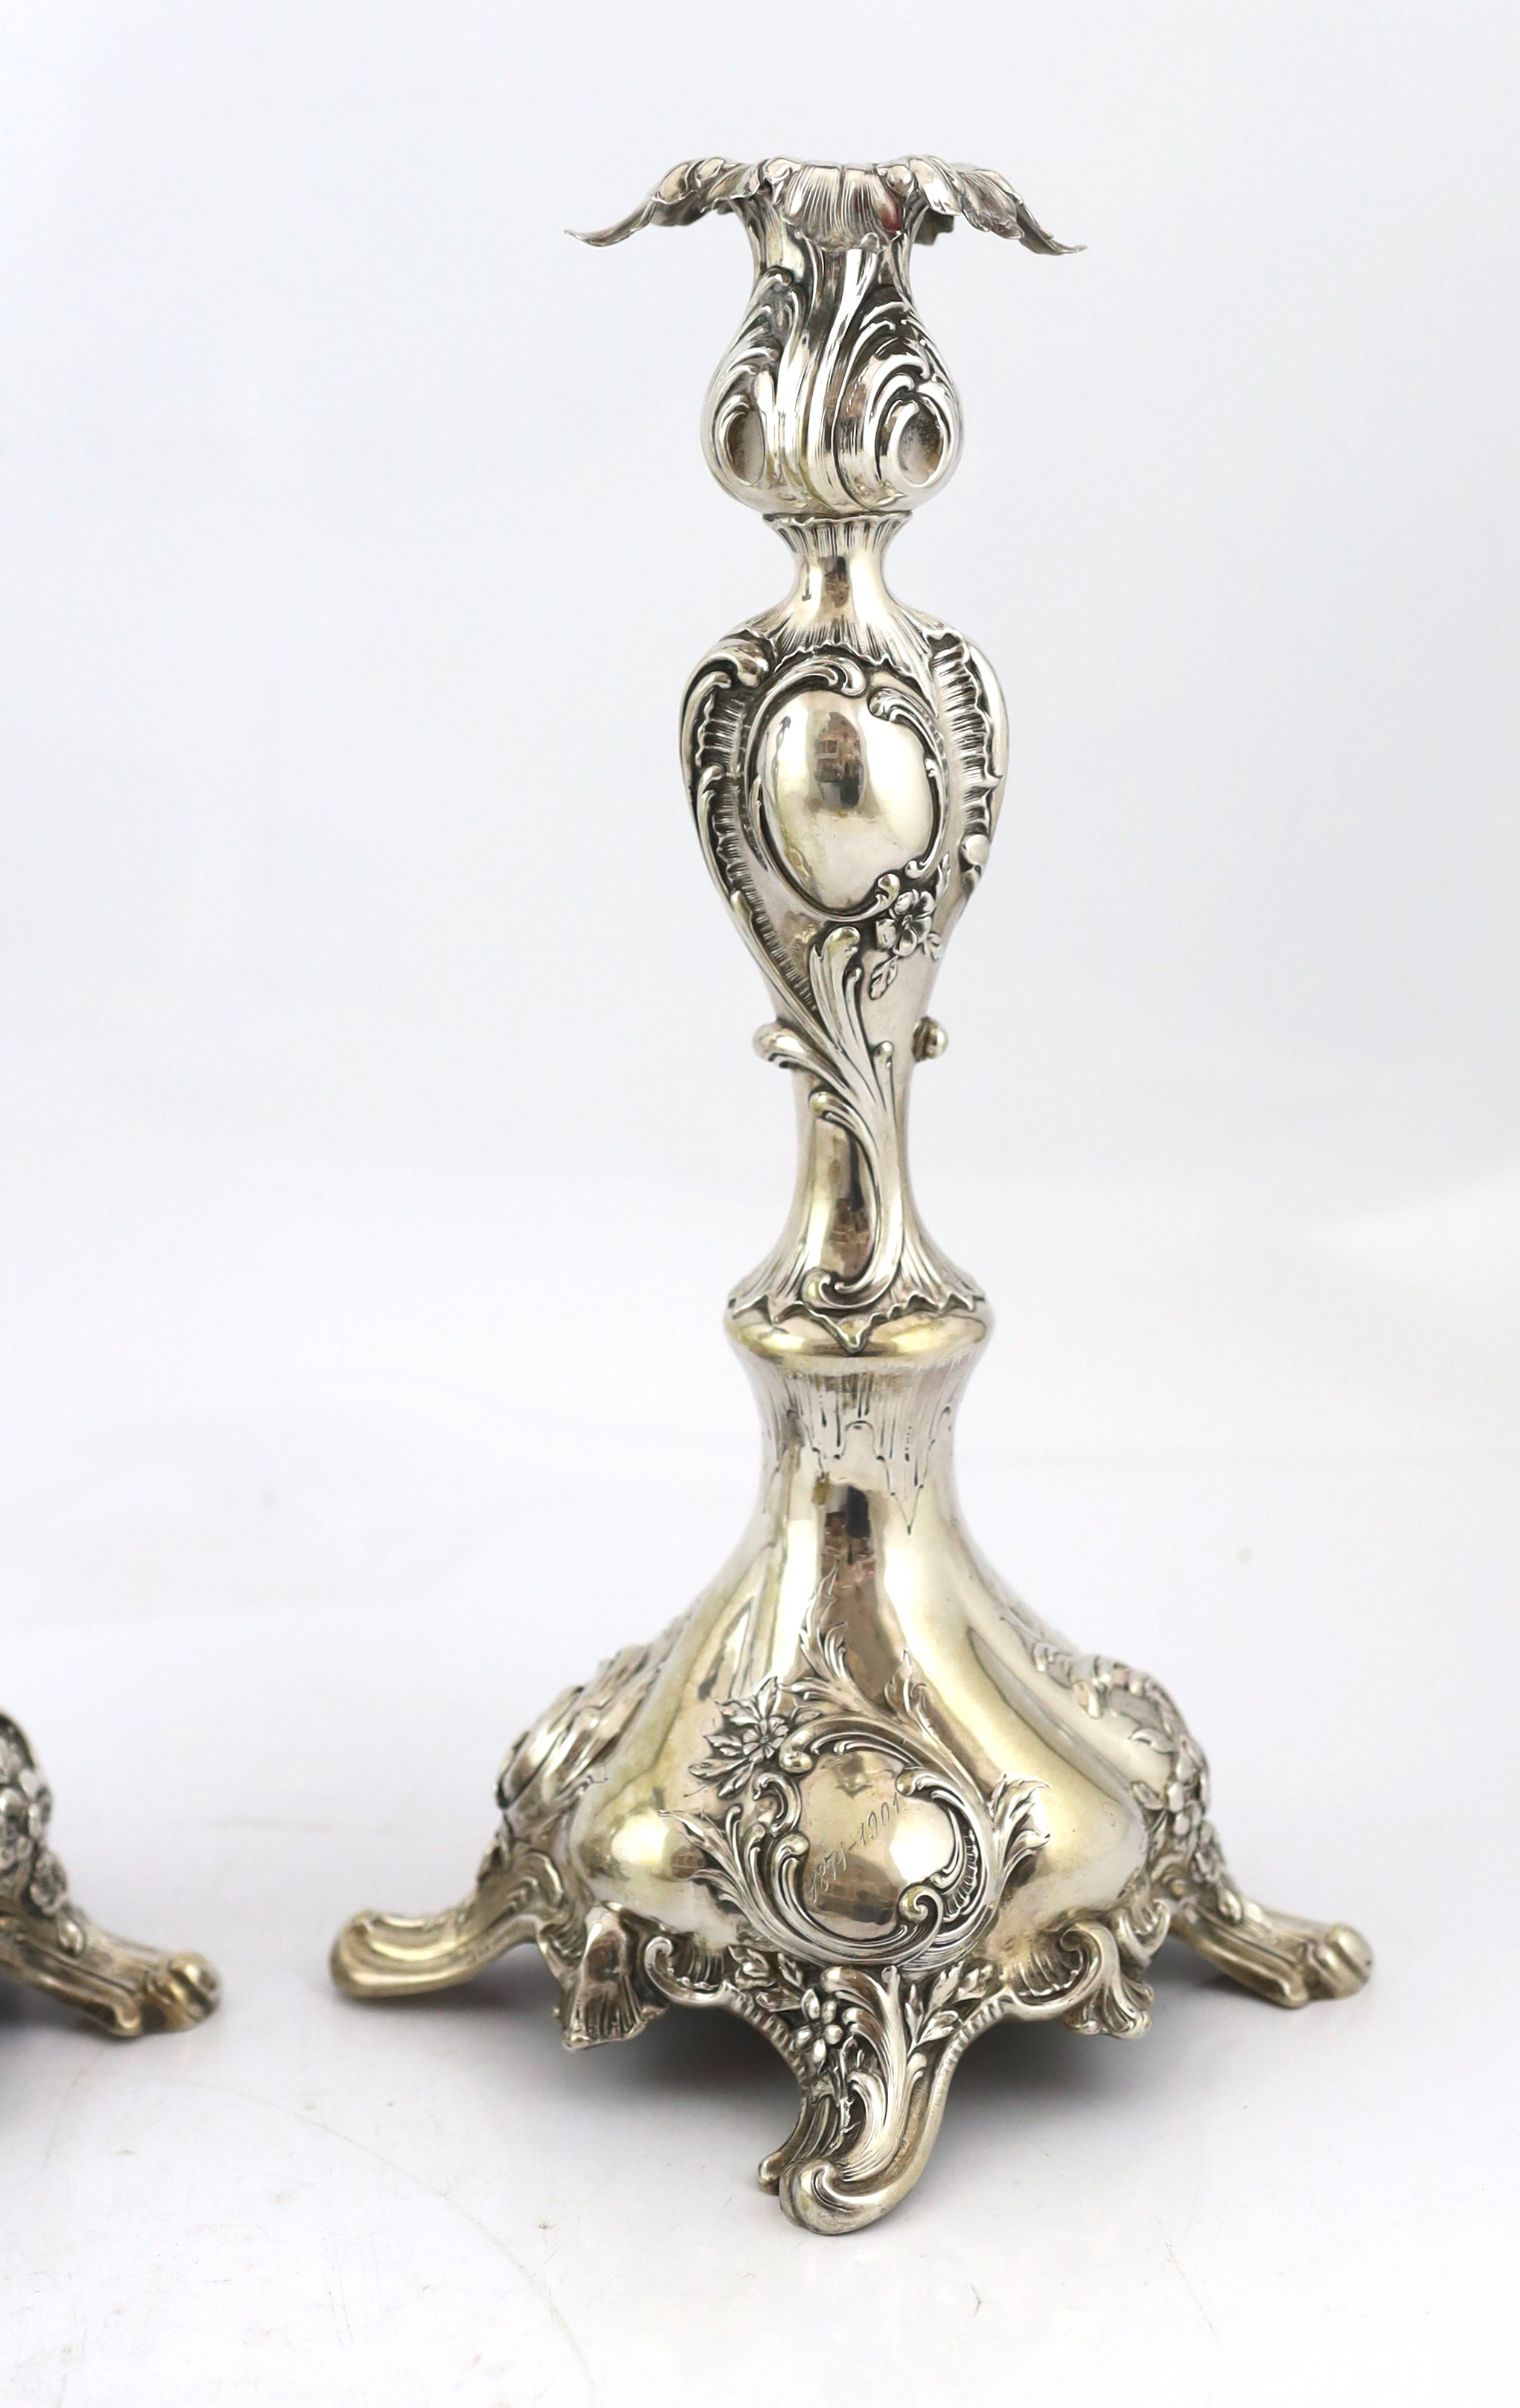 A pair of early 20th century German 800 standard silver candlesticks, by Schmedlin